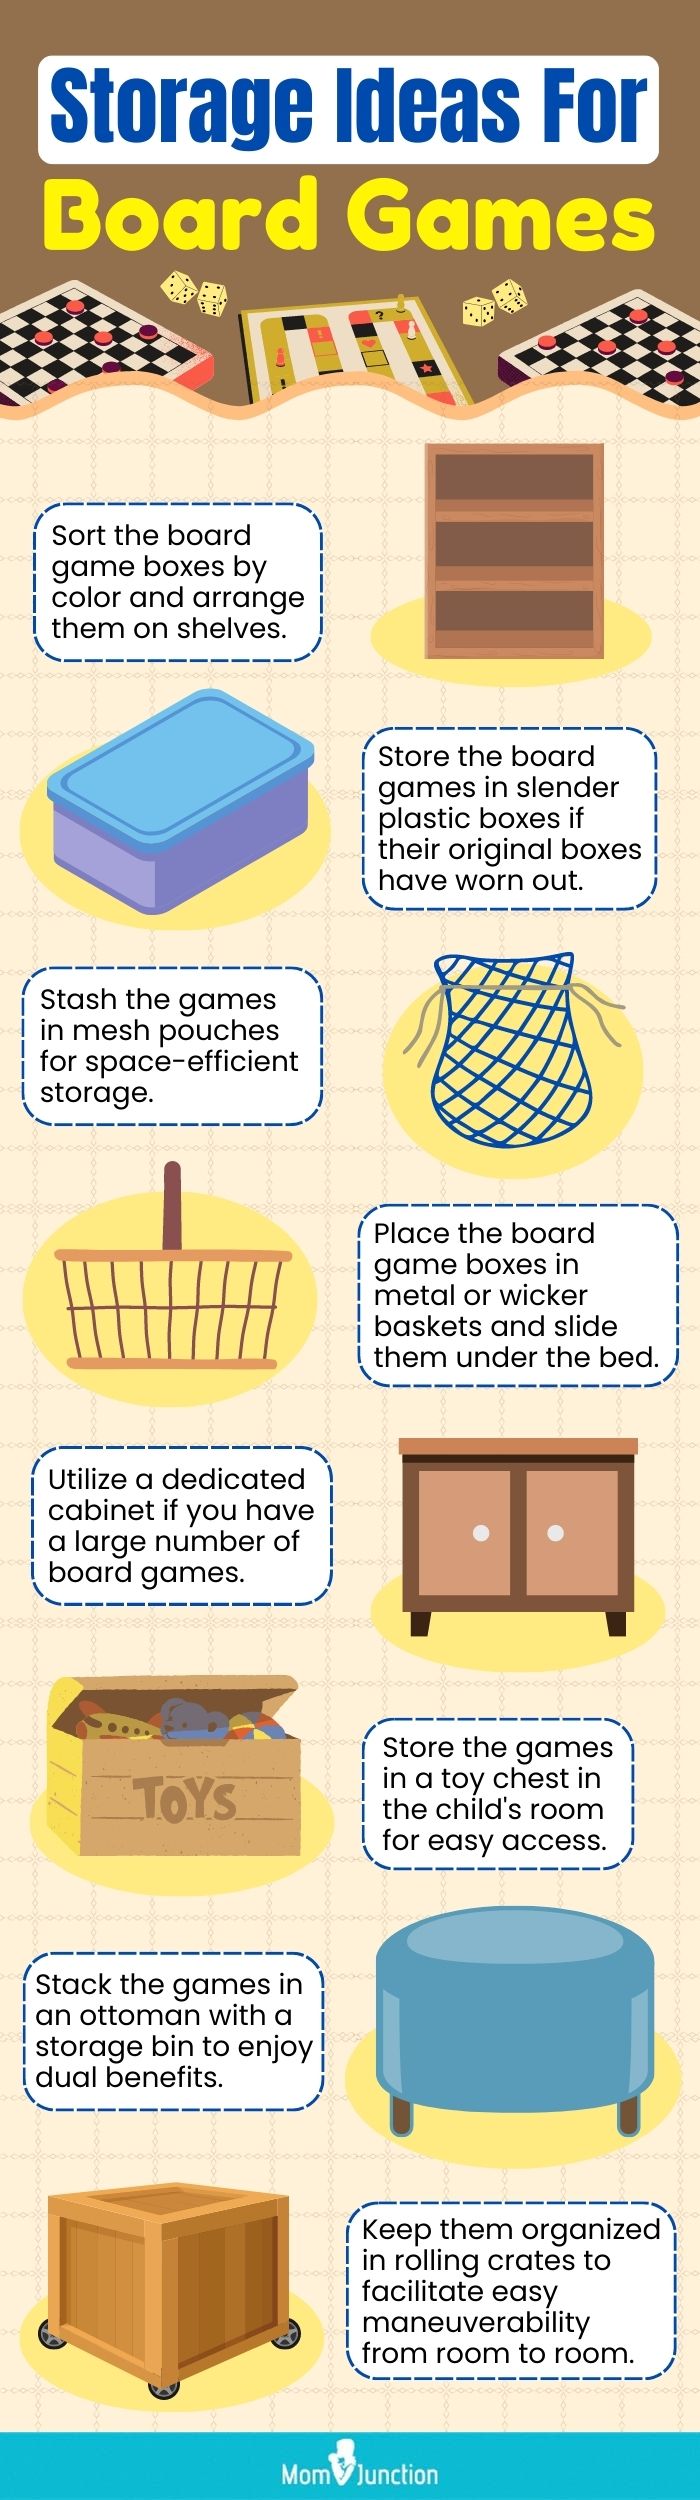 Storage Ideas For Board Games (infographic)